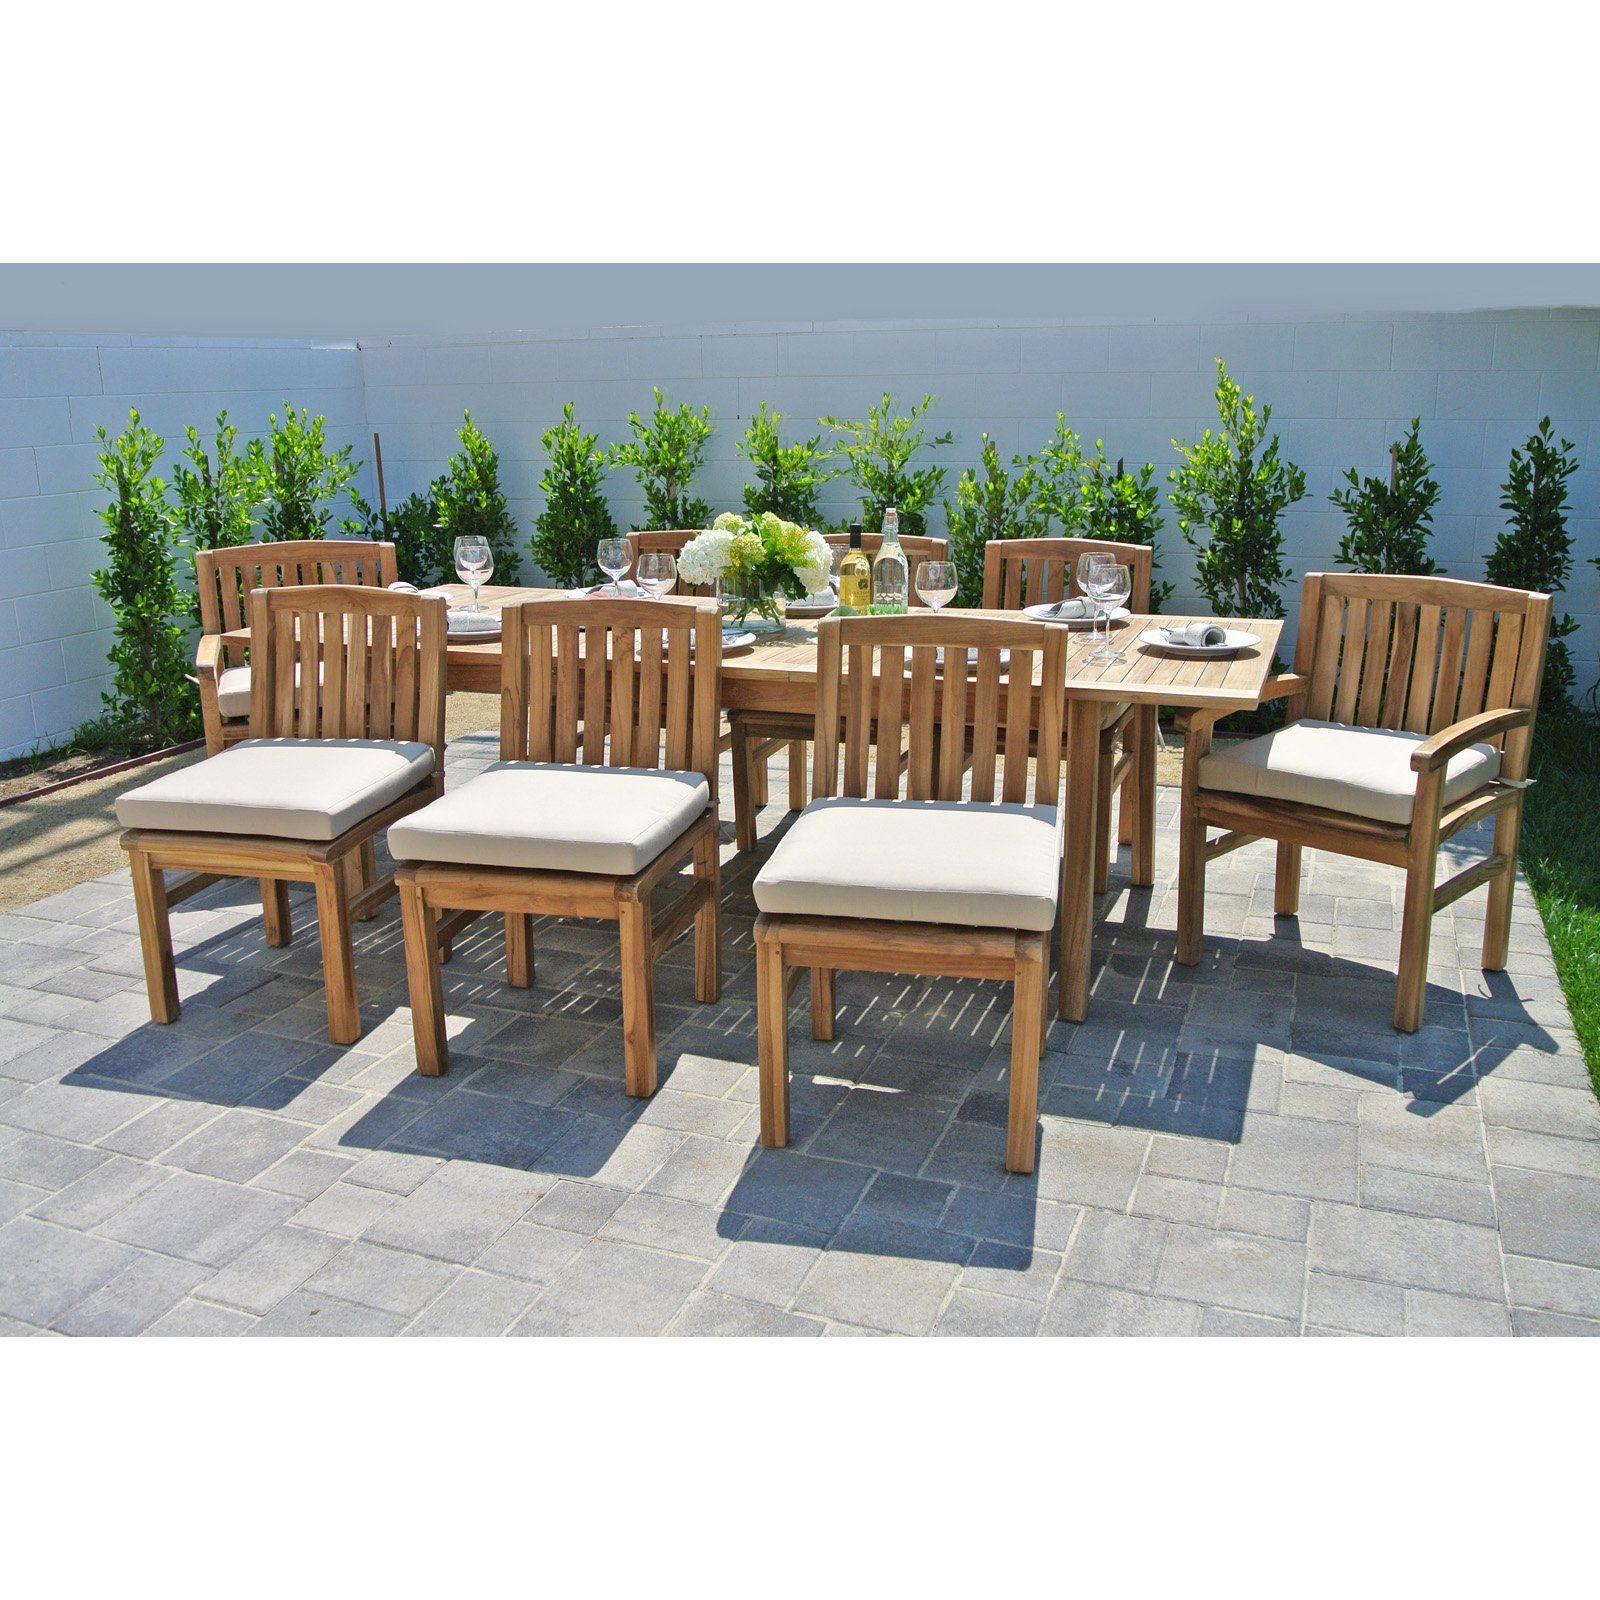 9 Piece Teak Outdoor Dining Sets Intended For Most Popular Outdoor Willow Creek Huntington 9 Piece Teak Patio Dining Set Canvas (View 2 of 15)